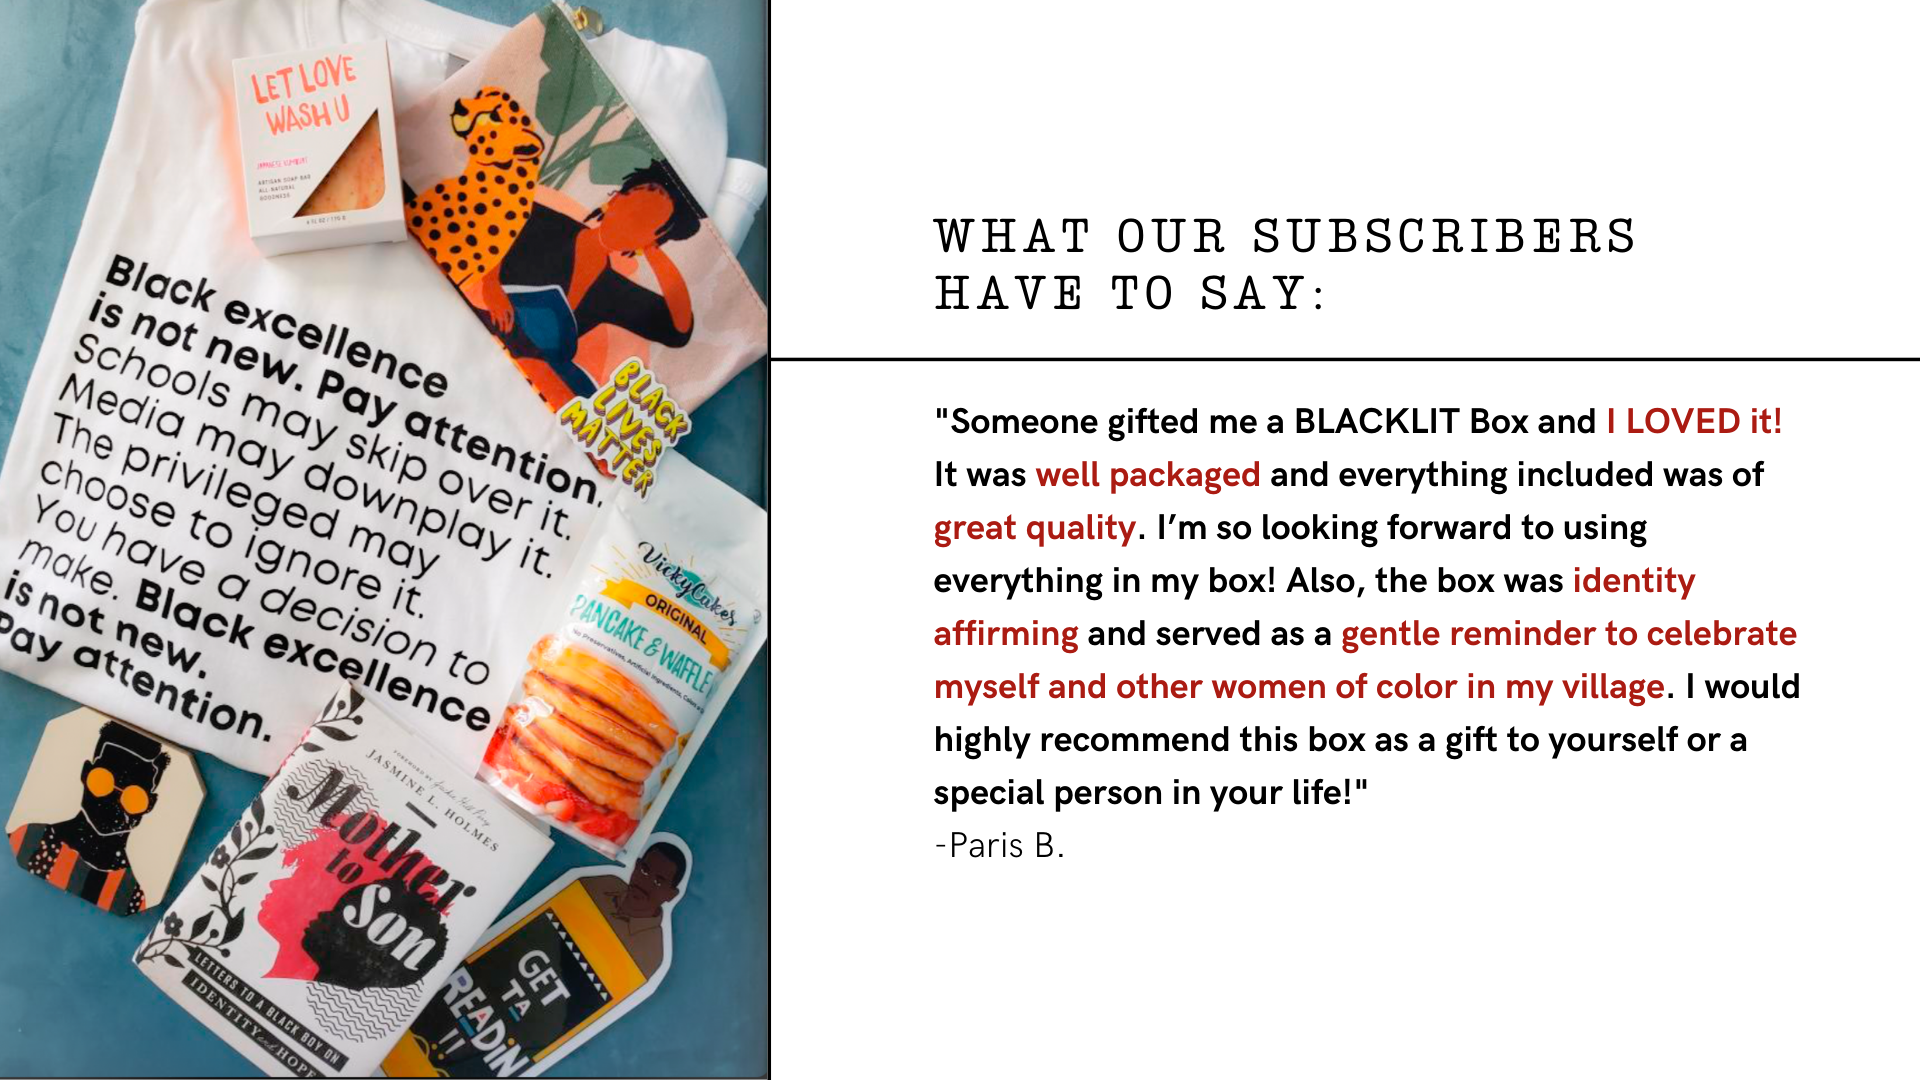 "Someone gifted me a BLACKLIT Box and I LOVED it! It was well packaged and everything included was of great quality. I’m so looking forward to using everything in my box! Also, the box was identity affirming and served as a gentle reminder to celebrate myself and other women of color in my village. I would highly recommend this box as a gift to yourself or a special person in your life!" -Paris B.